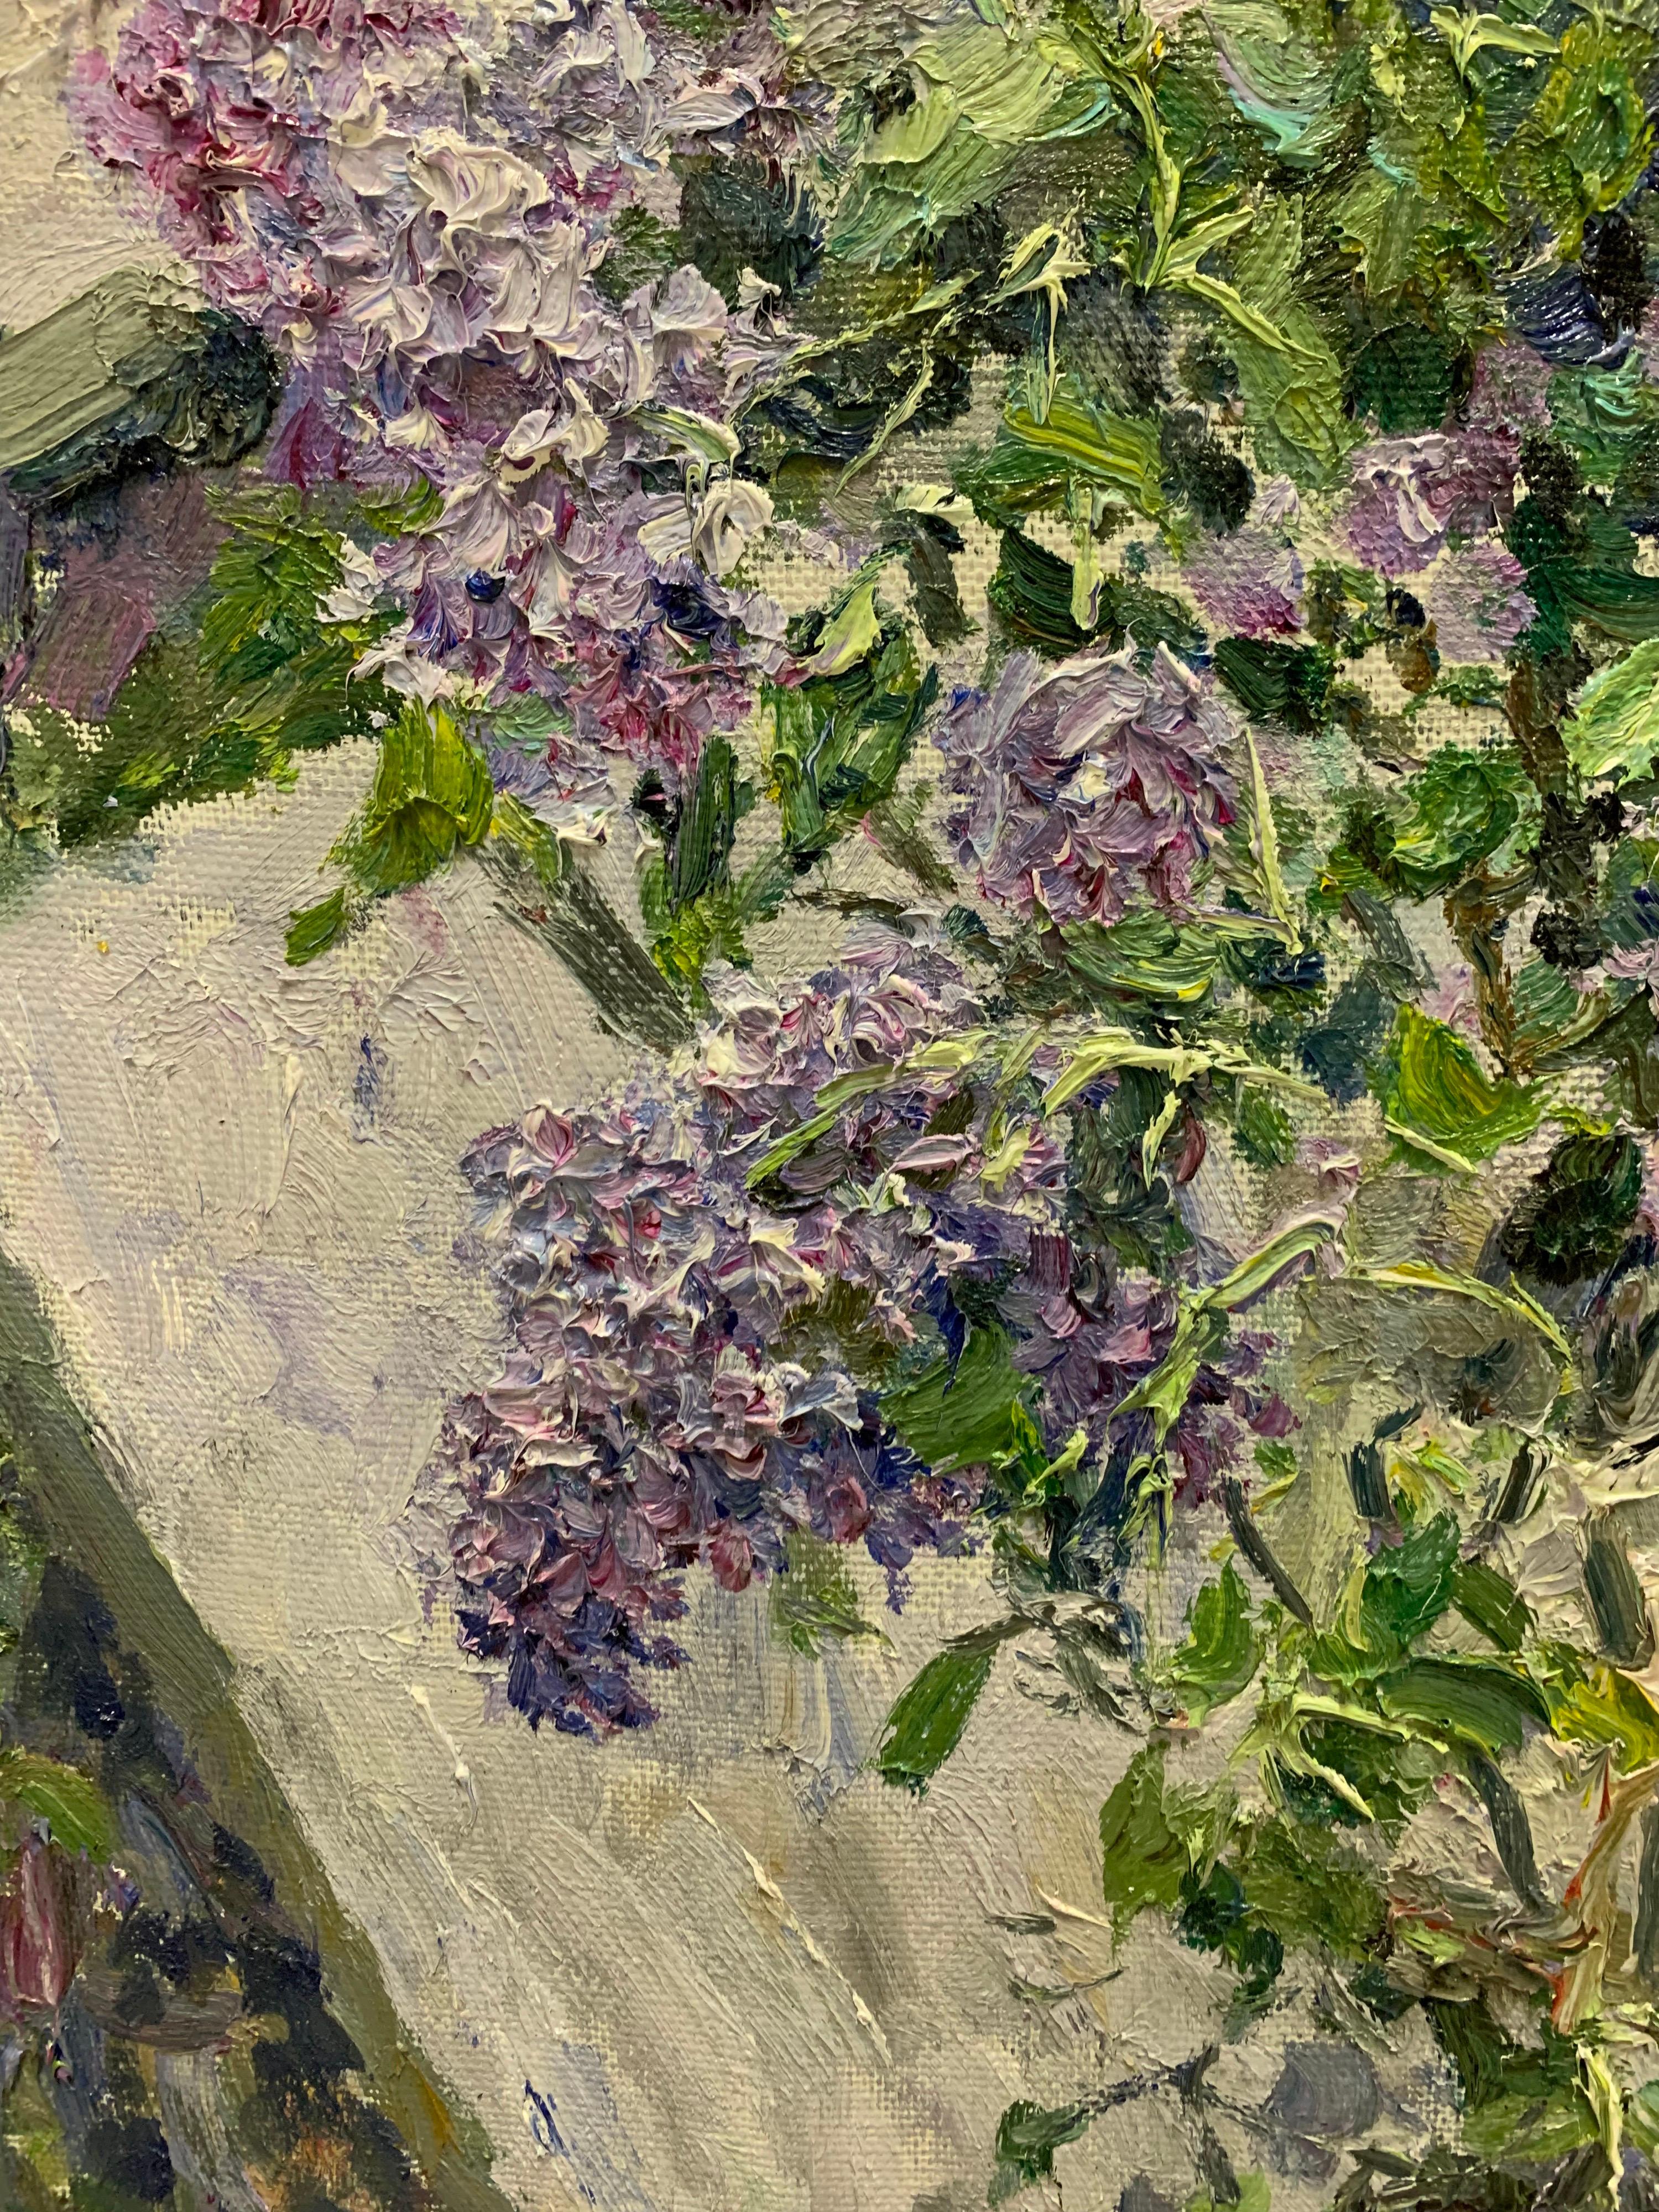 Flowers,Garden ,Lilac ,Purple,Spring
Russian art

Georgij MOROZ (Dneprodzerzinsk, Ucraina, 1937 - St. Petersburg, 2015)
MUSEUMS
Moscow, Tret’jakov Gallery
Moscow, USSR Artists Collection
Moscow, The Ministry of Culture Collection
St. Petersburg,